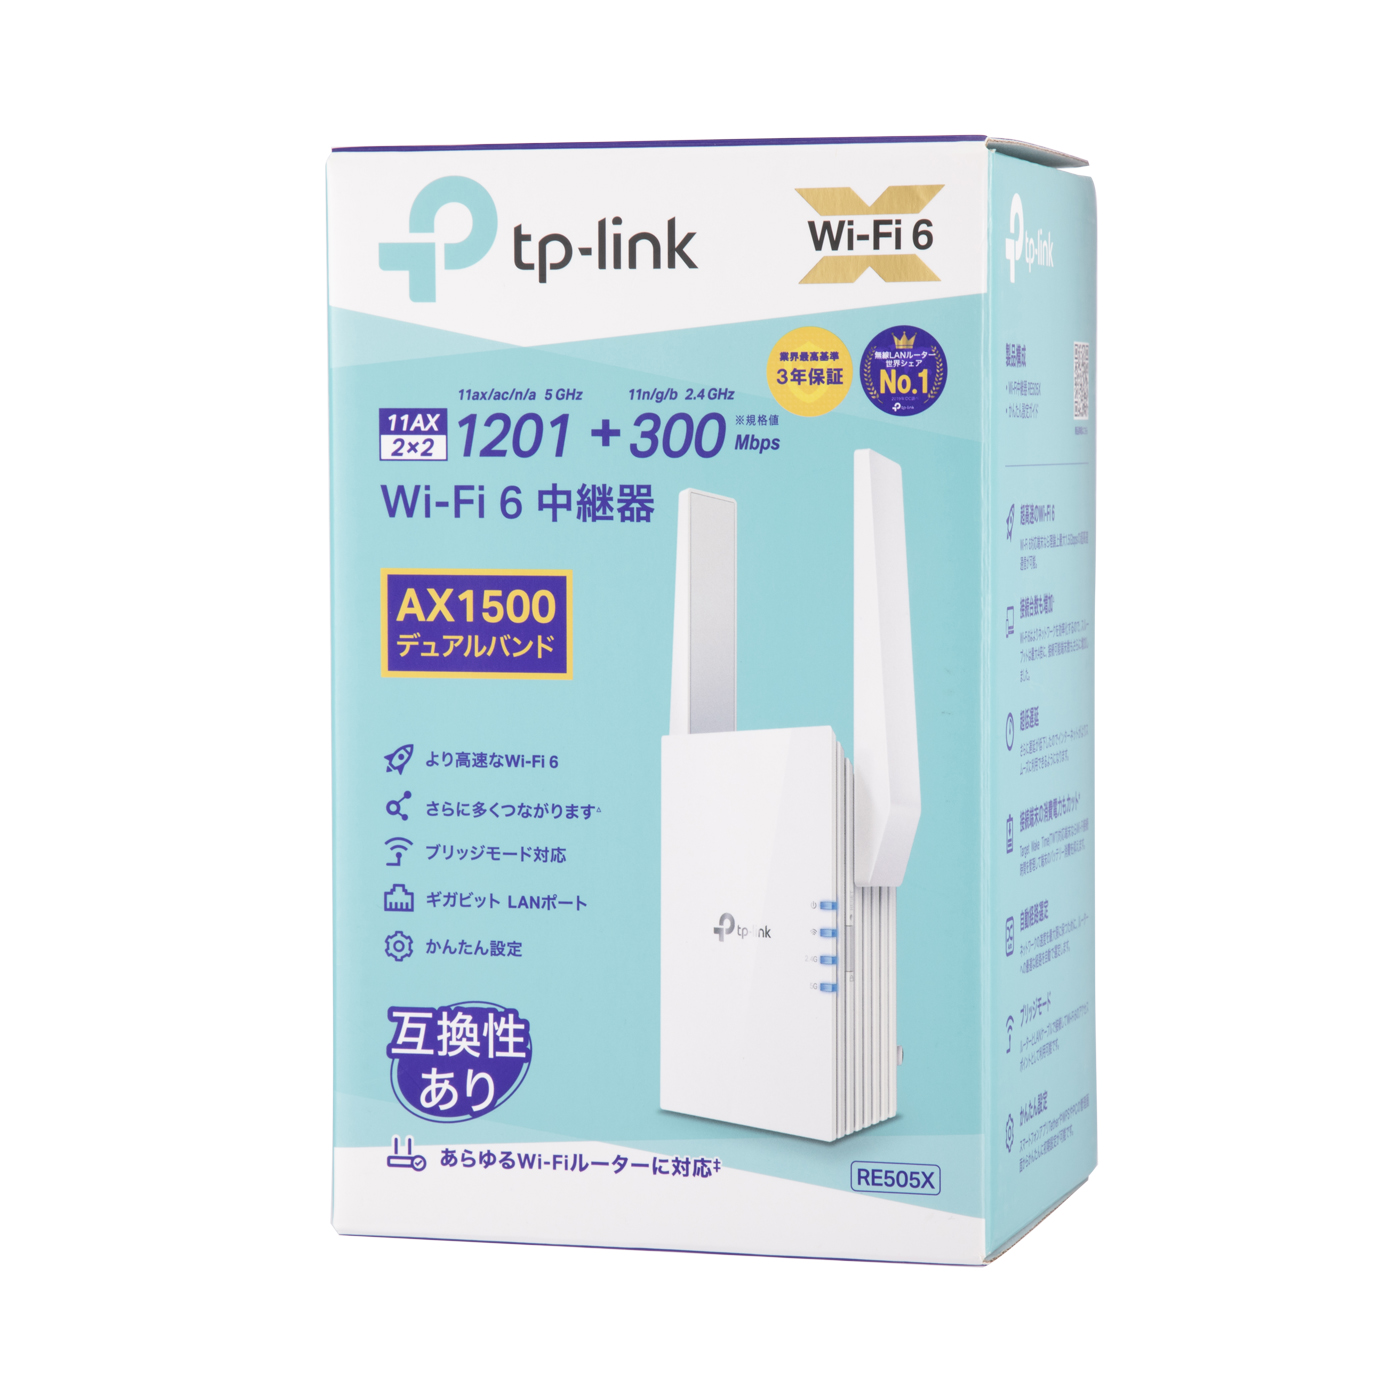 TP-Link RE505Xを他商品と比較！口コミや評判を実際に使ってレビューしました！ | mybest